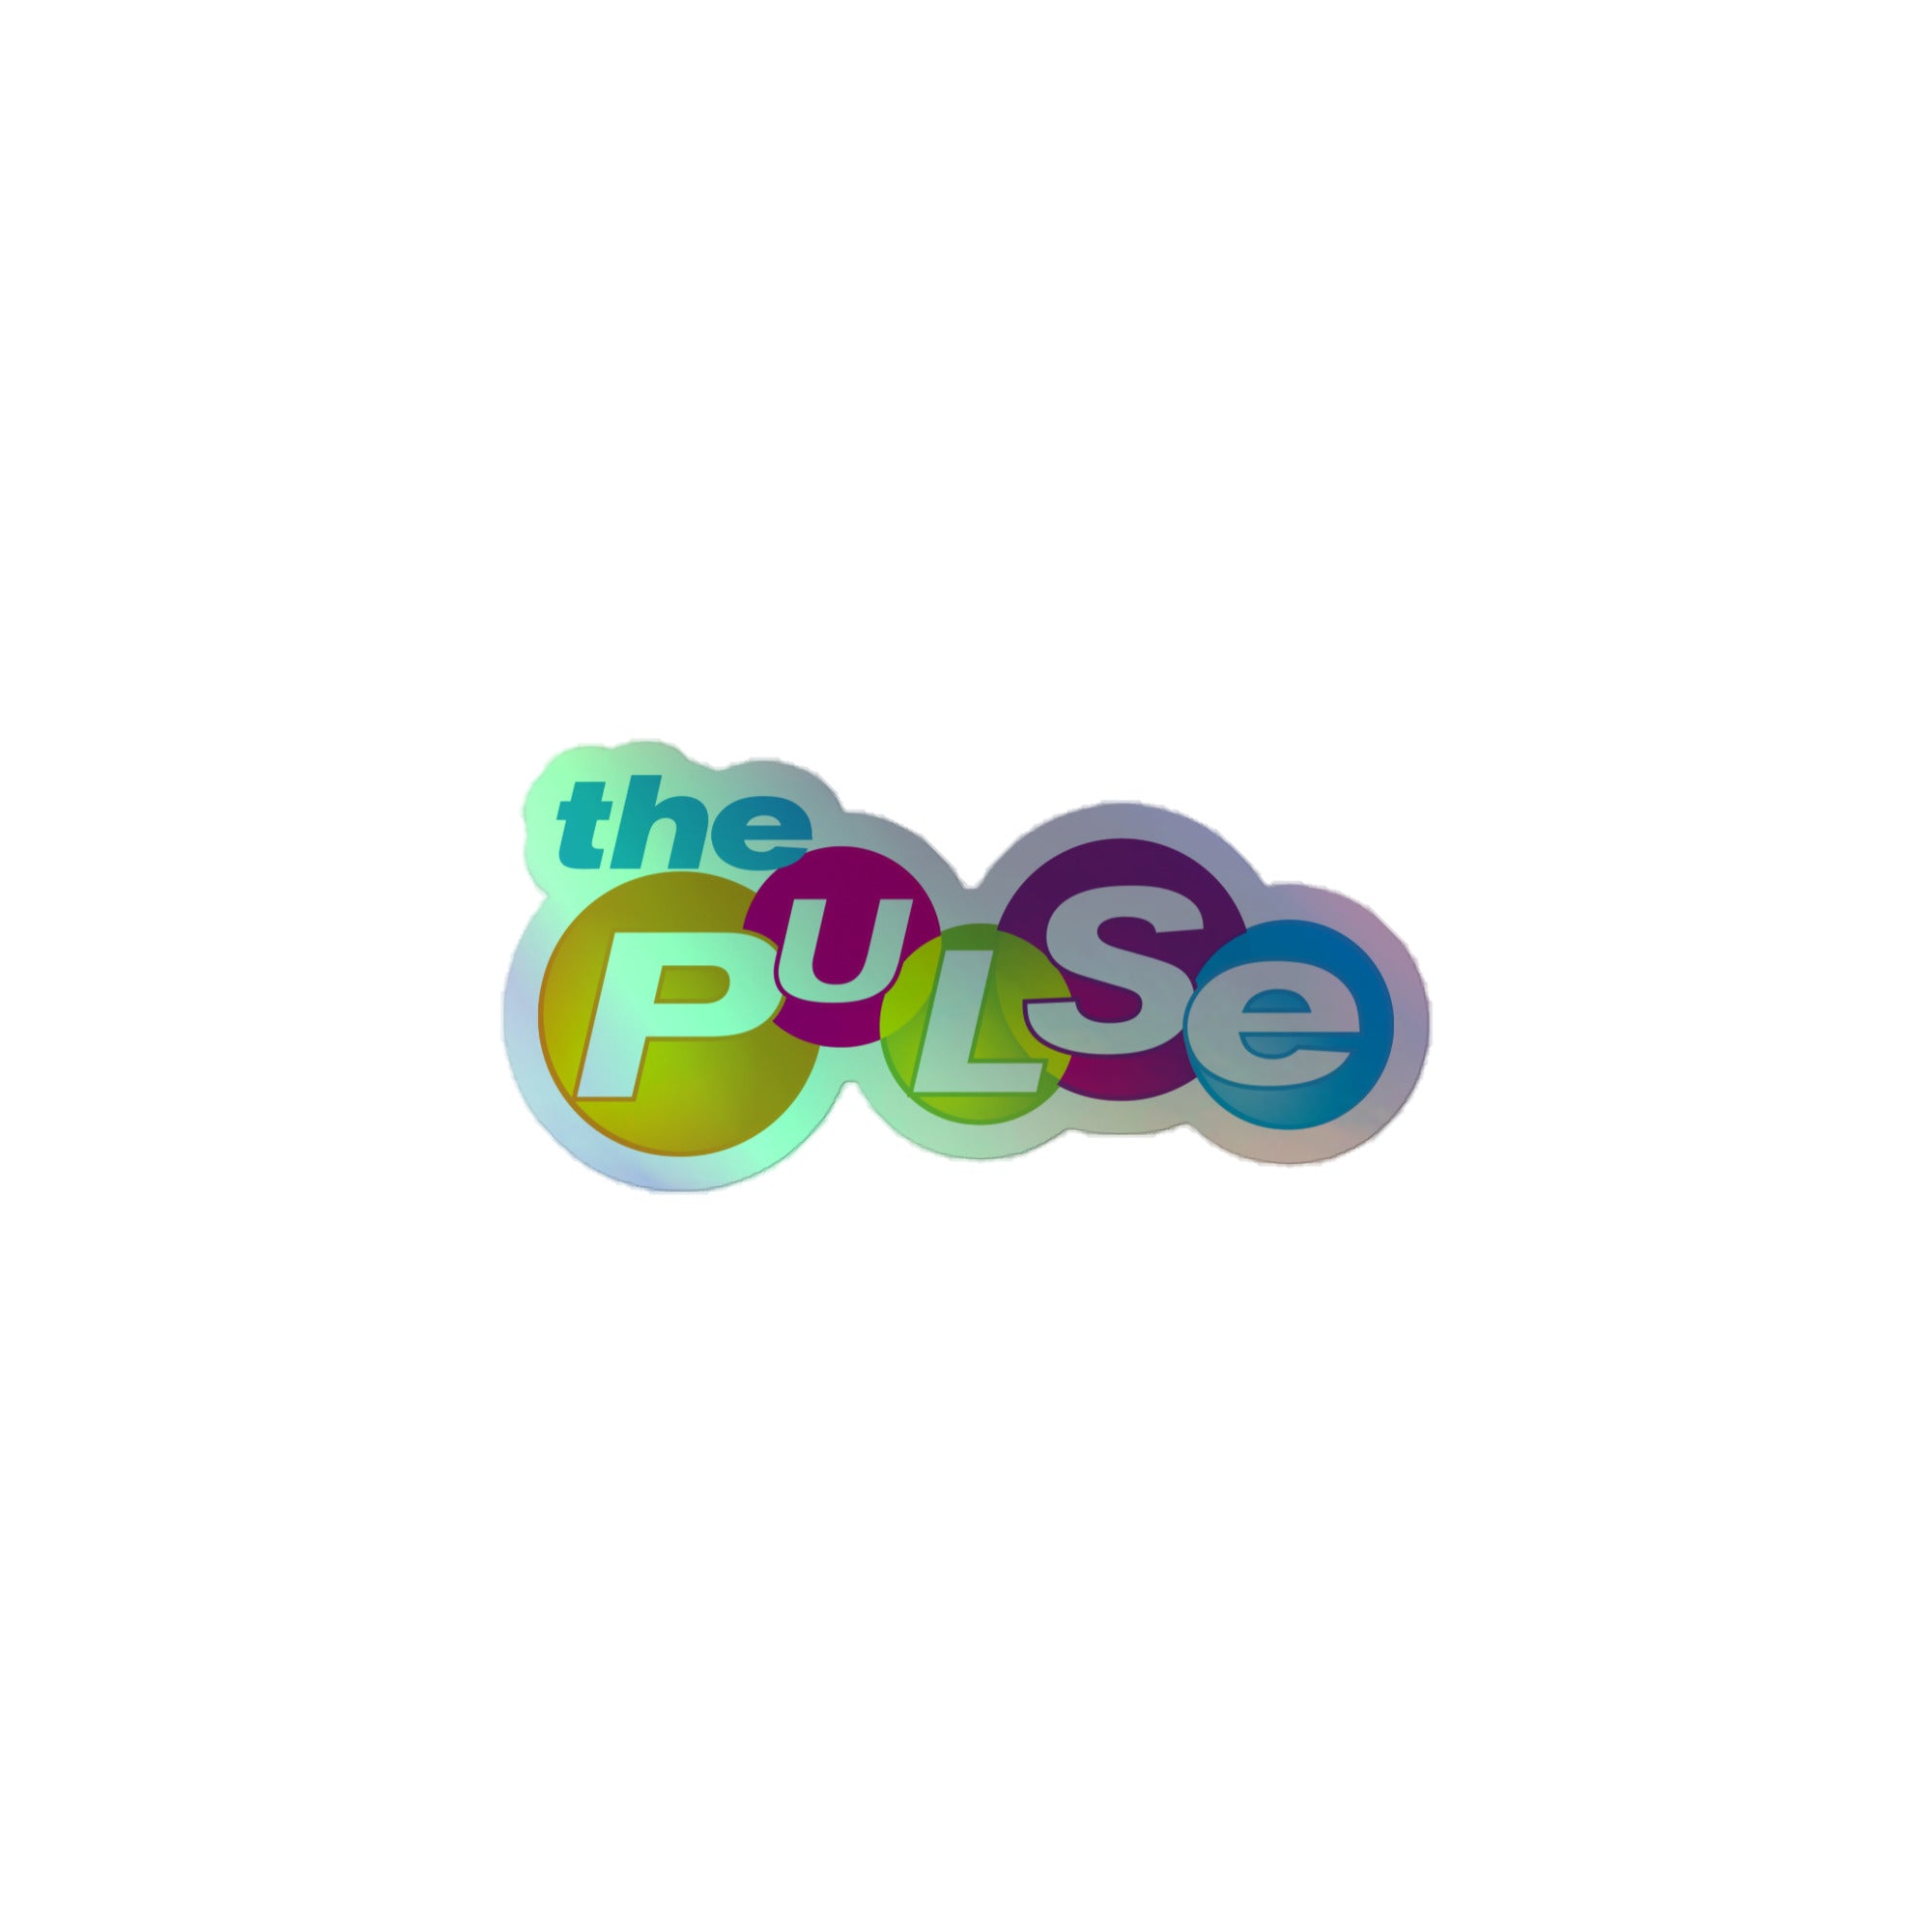 The Pulse: Holographic Sticker